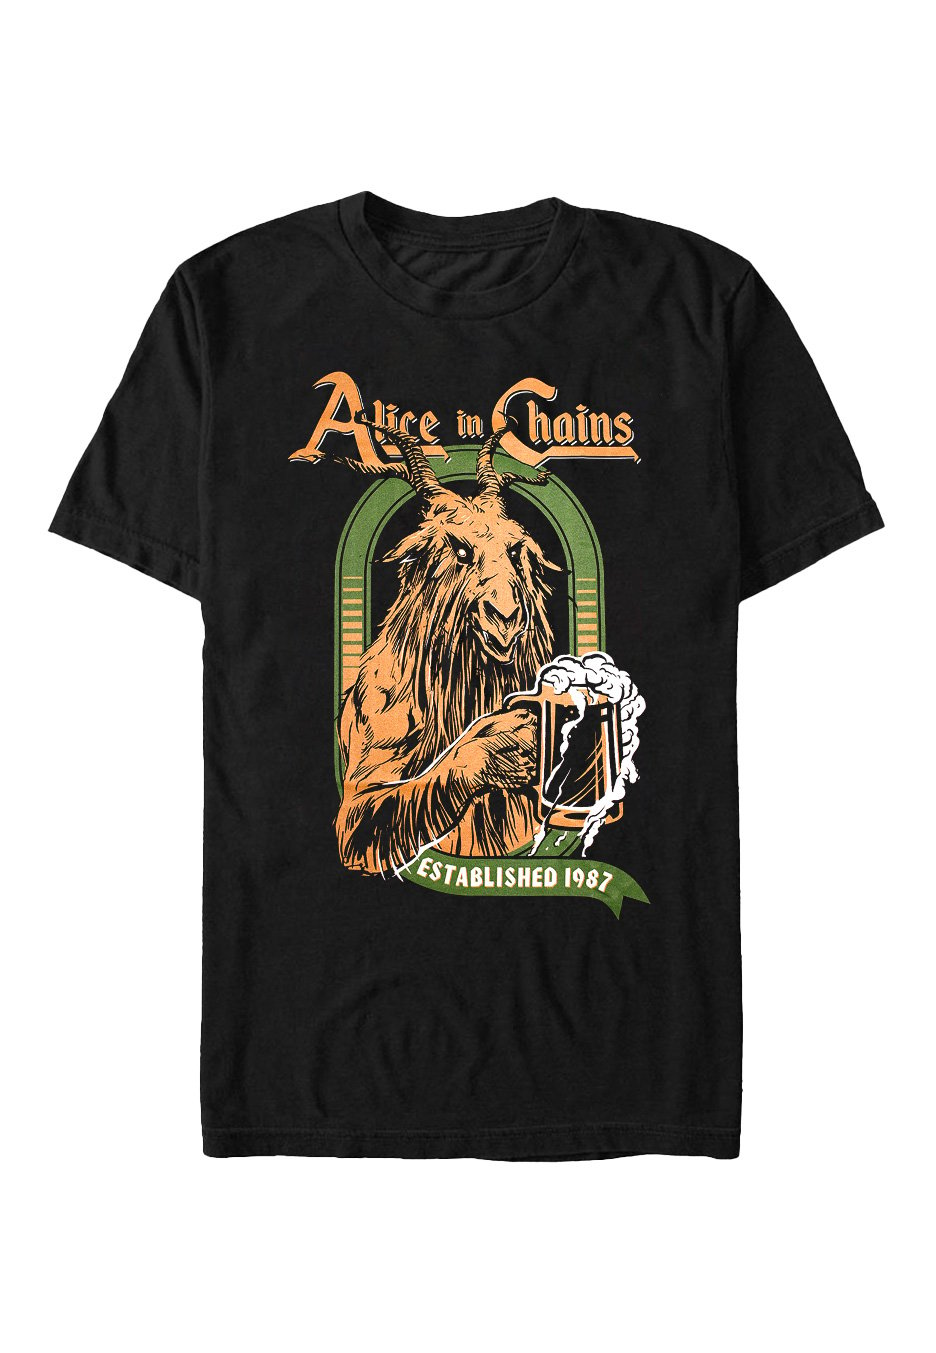 Alice In Chains - Devils Brew - T-Shirt